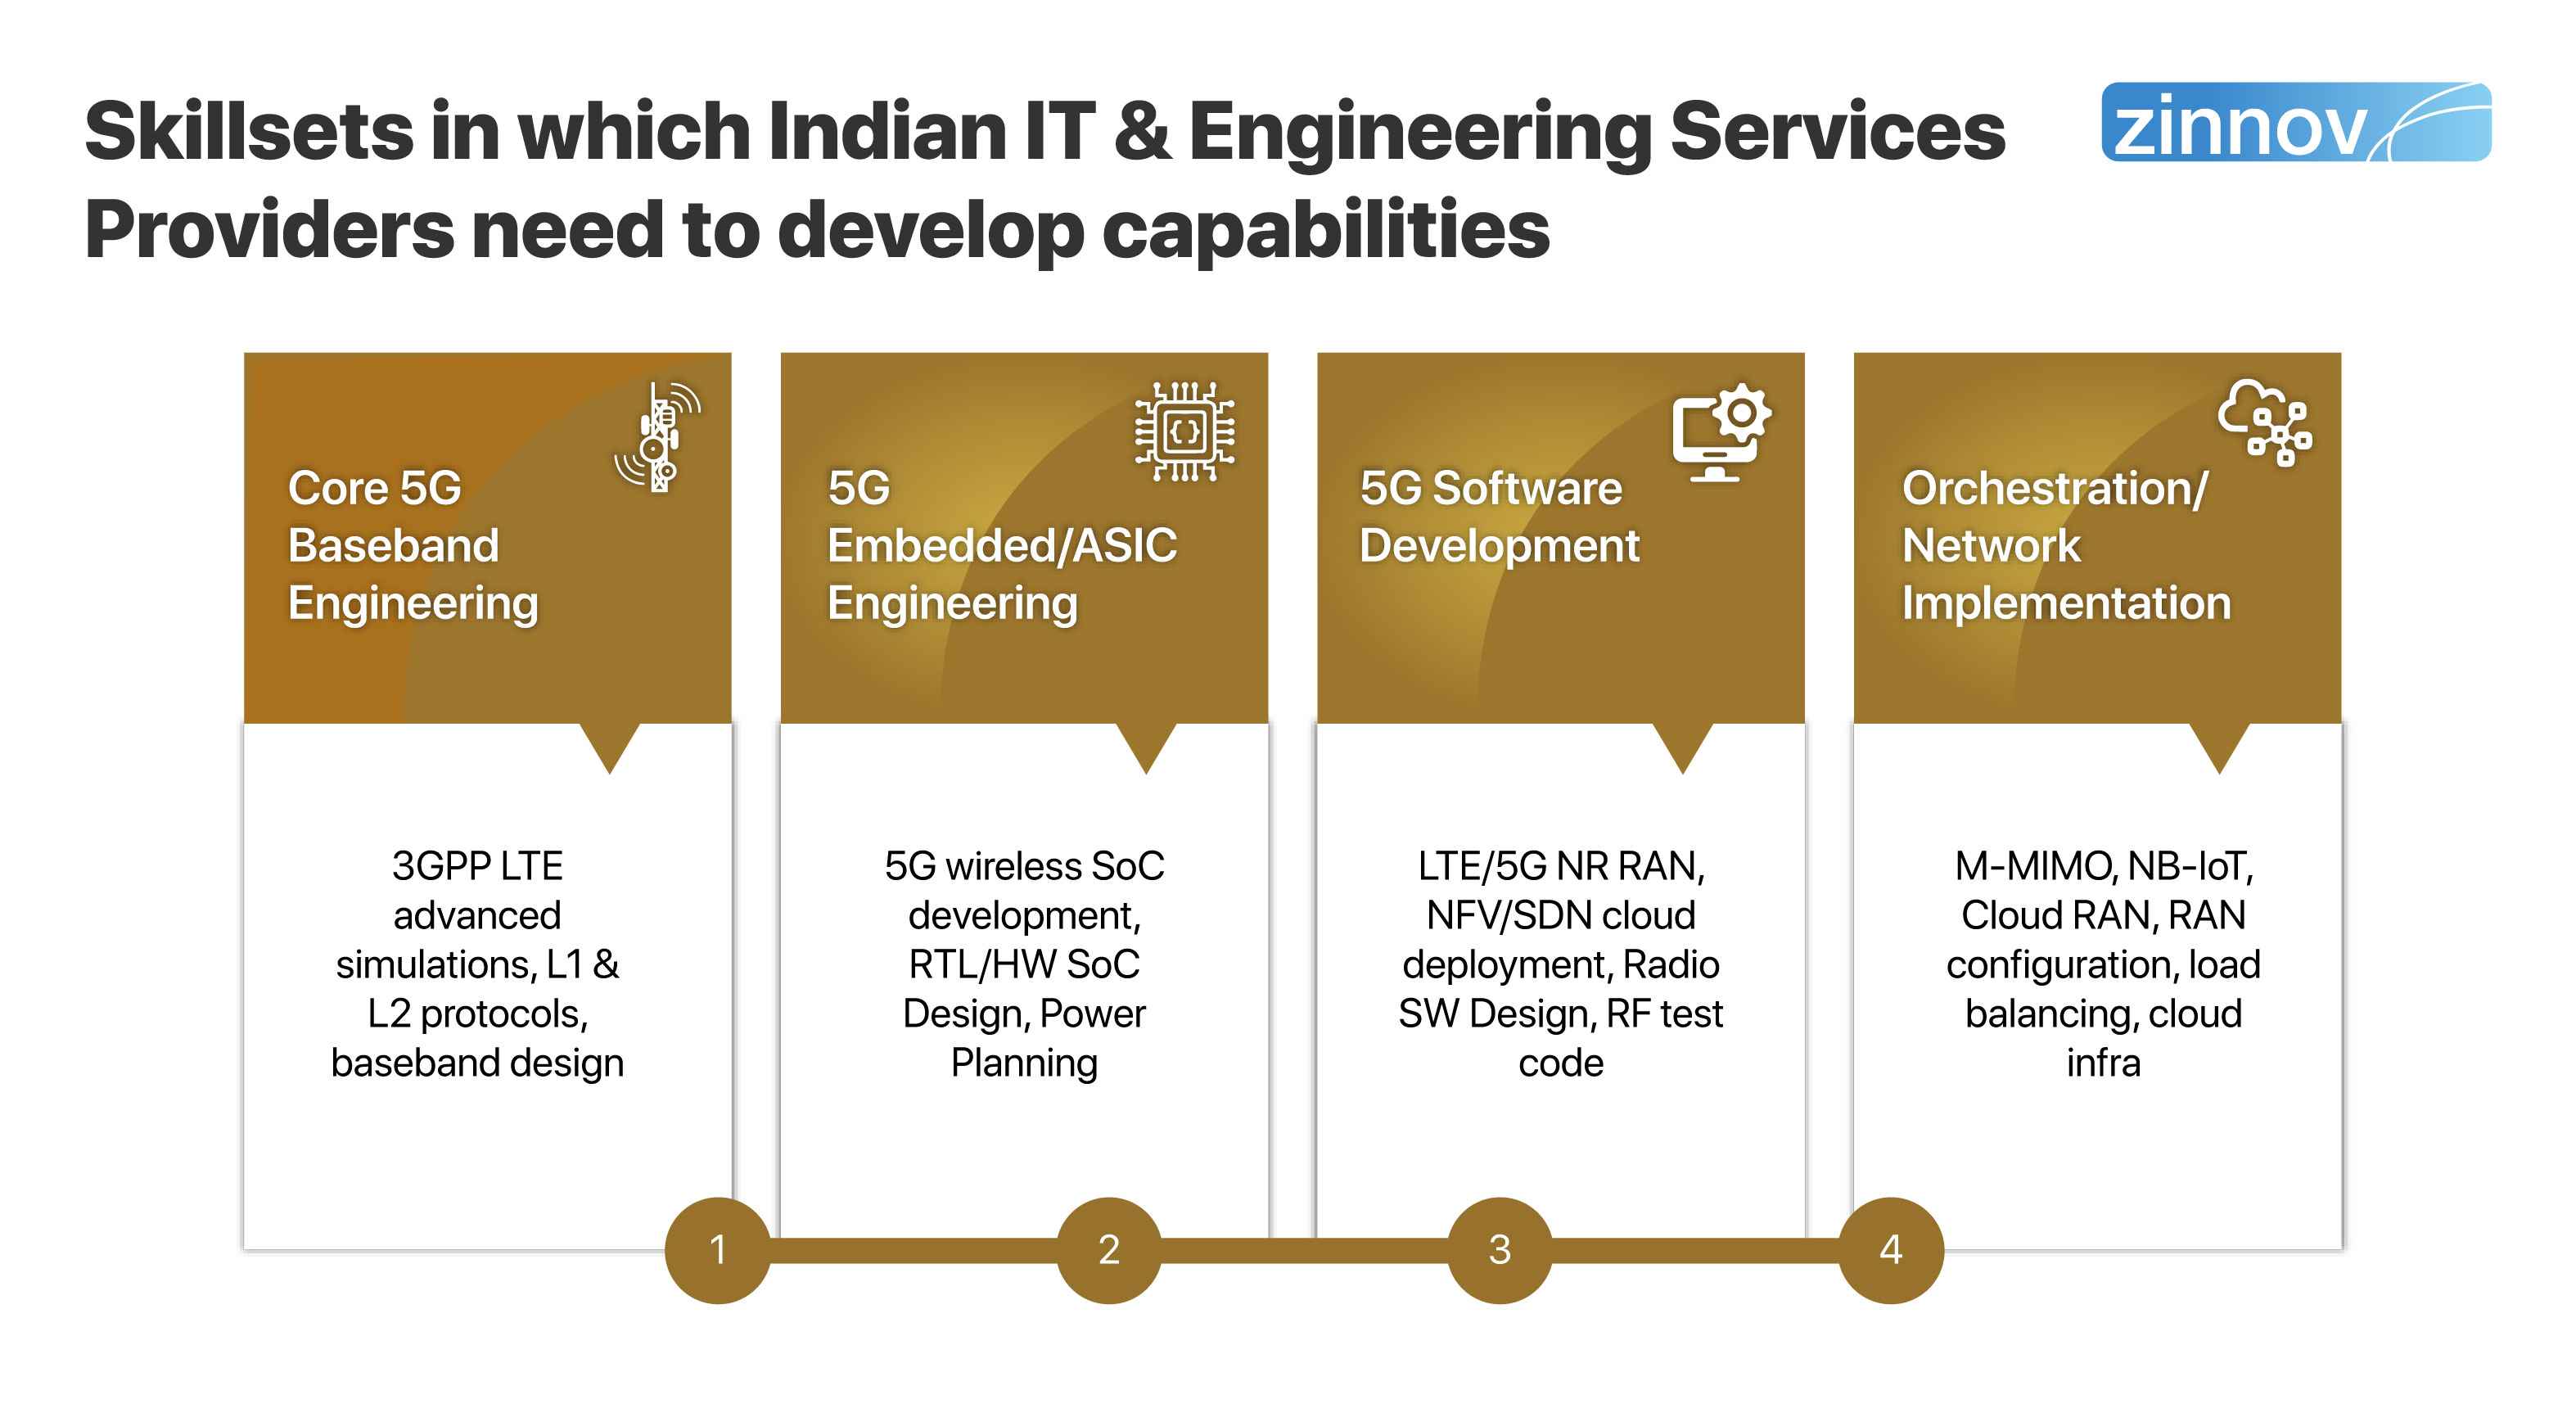 Skillsets in Indian IT and engineering services providers need to develop capabilities